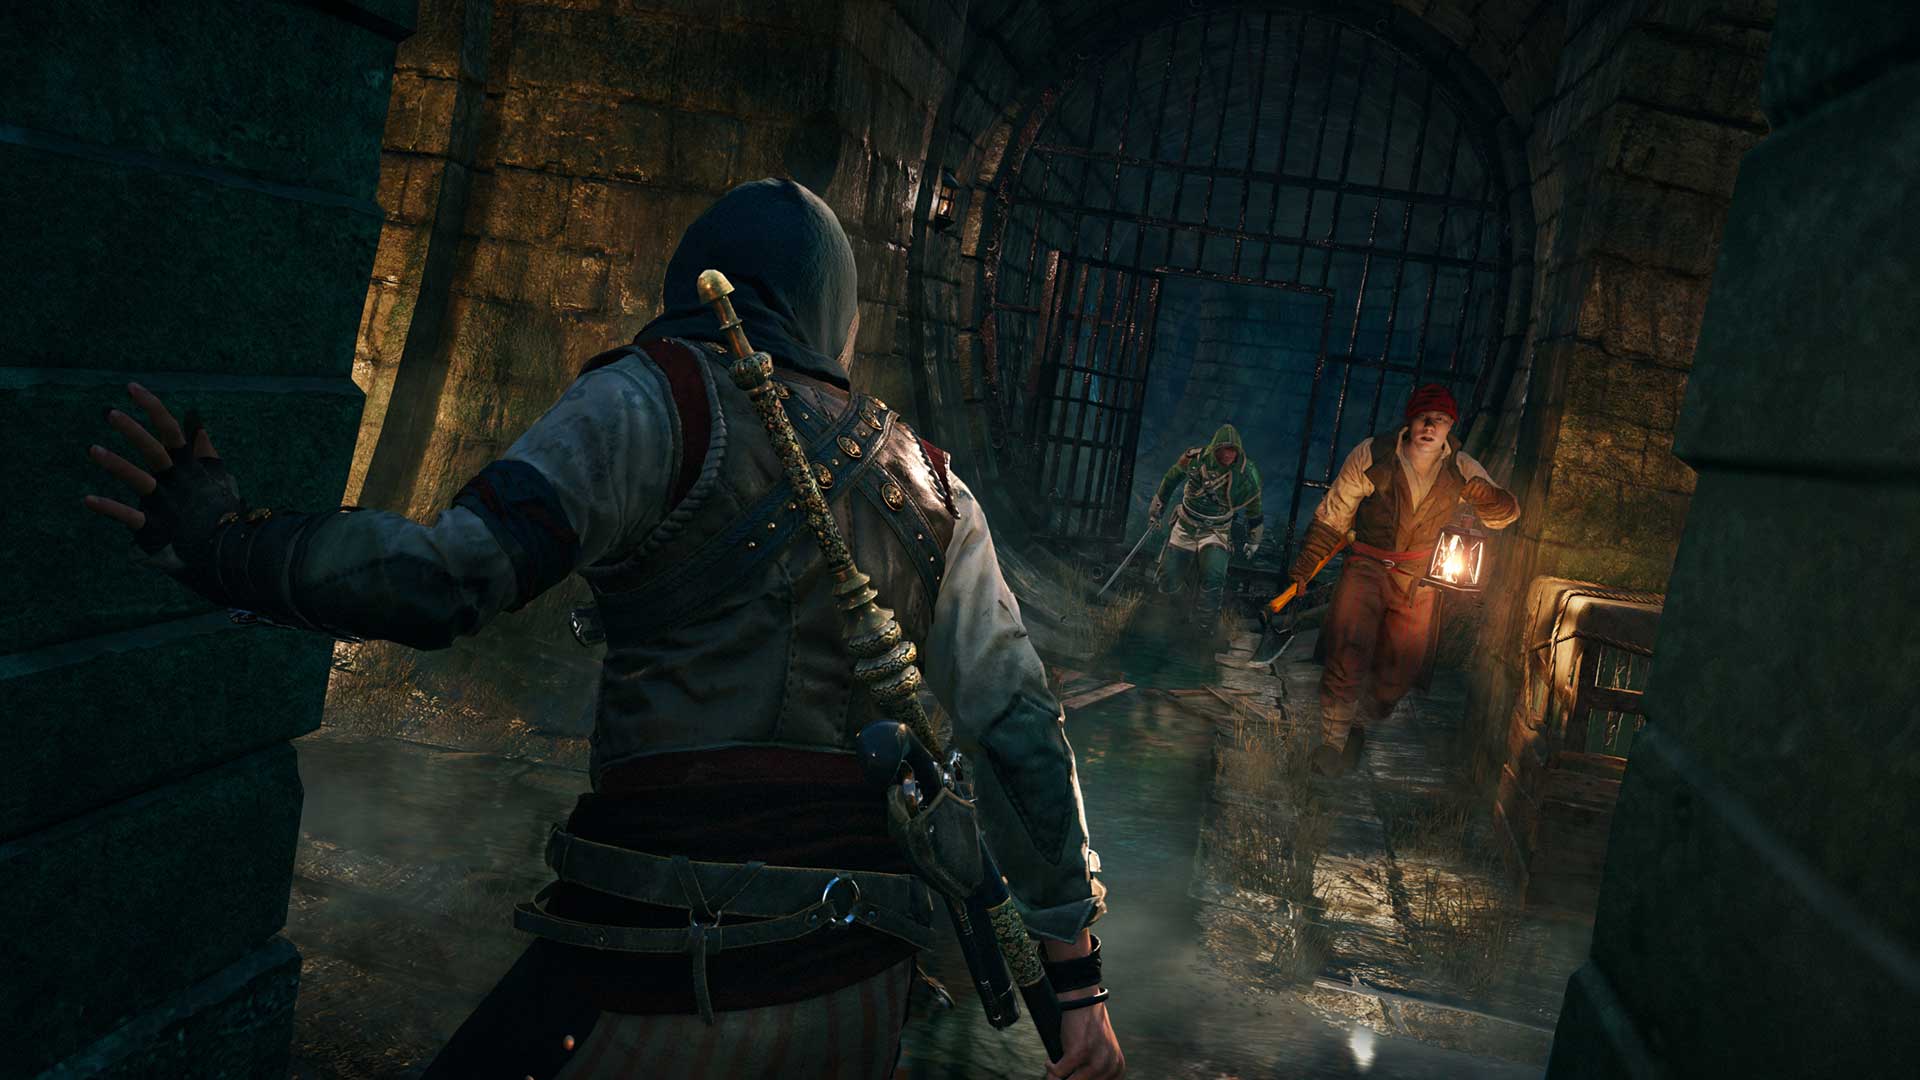 Free Images  Assassin's Creed: Unity